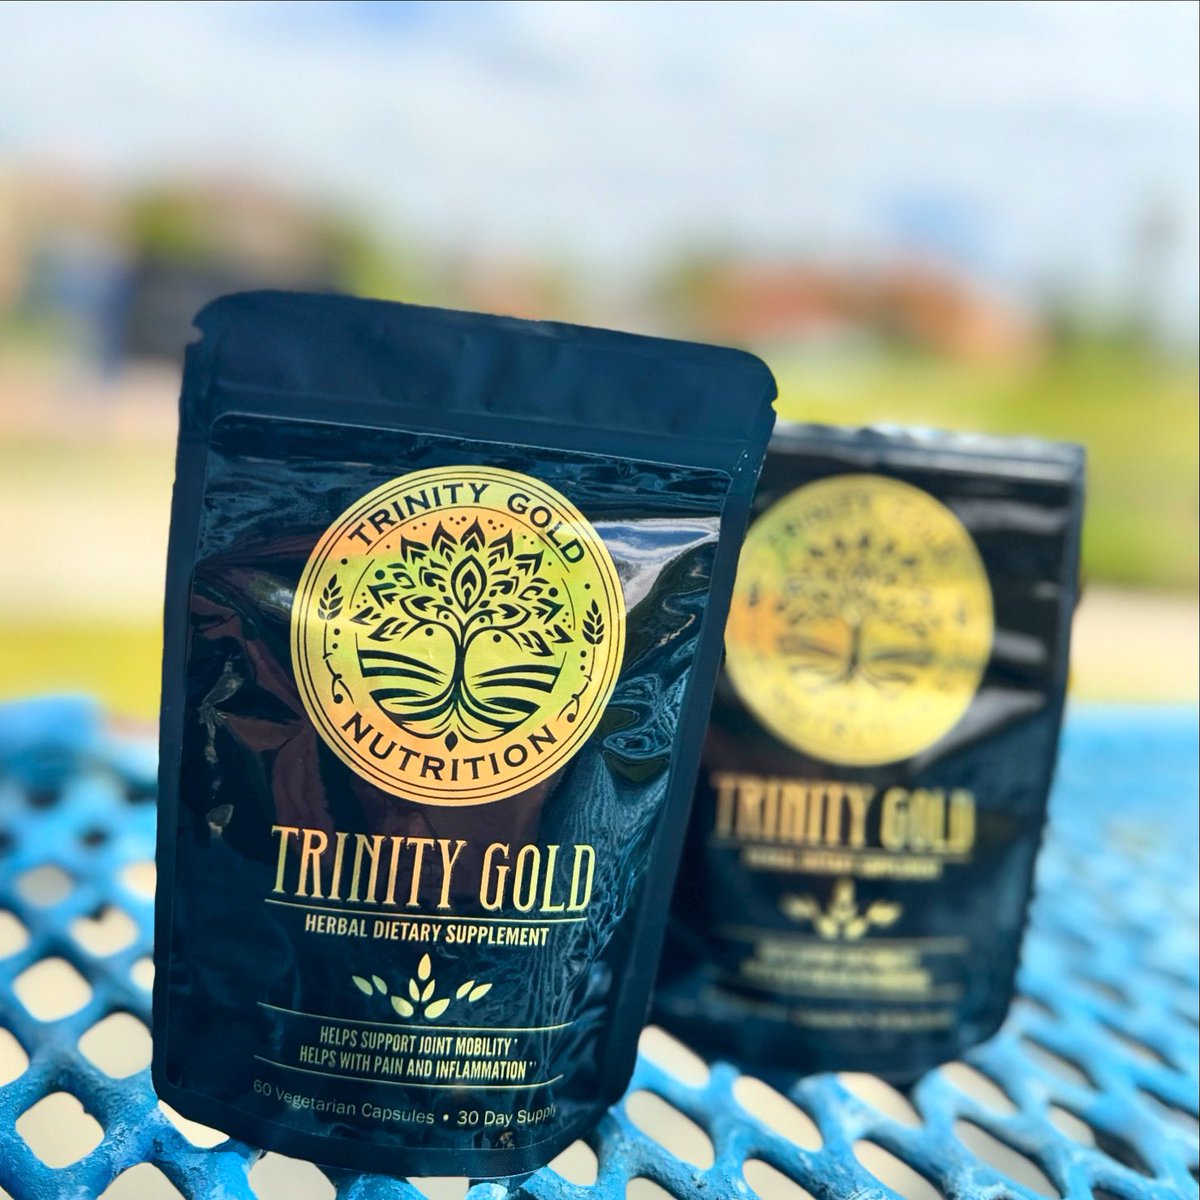 🏆 If you’ve got chronic pain & you’re ready for your life to be changed, hit that link below 👇 today! 🔗 trinitygoldnutrition.com